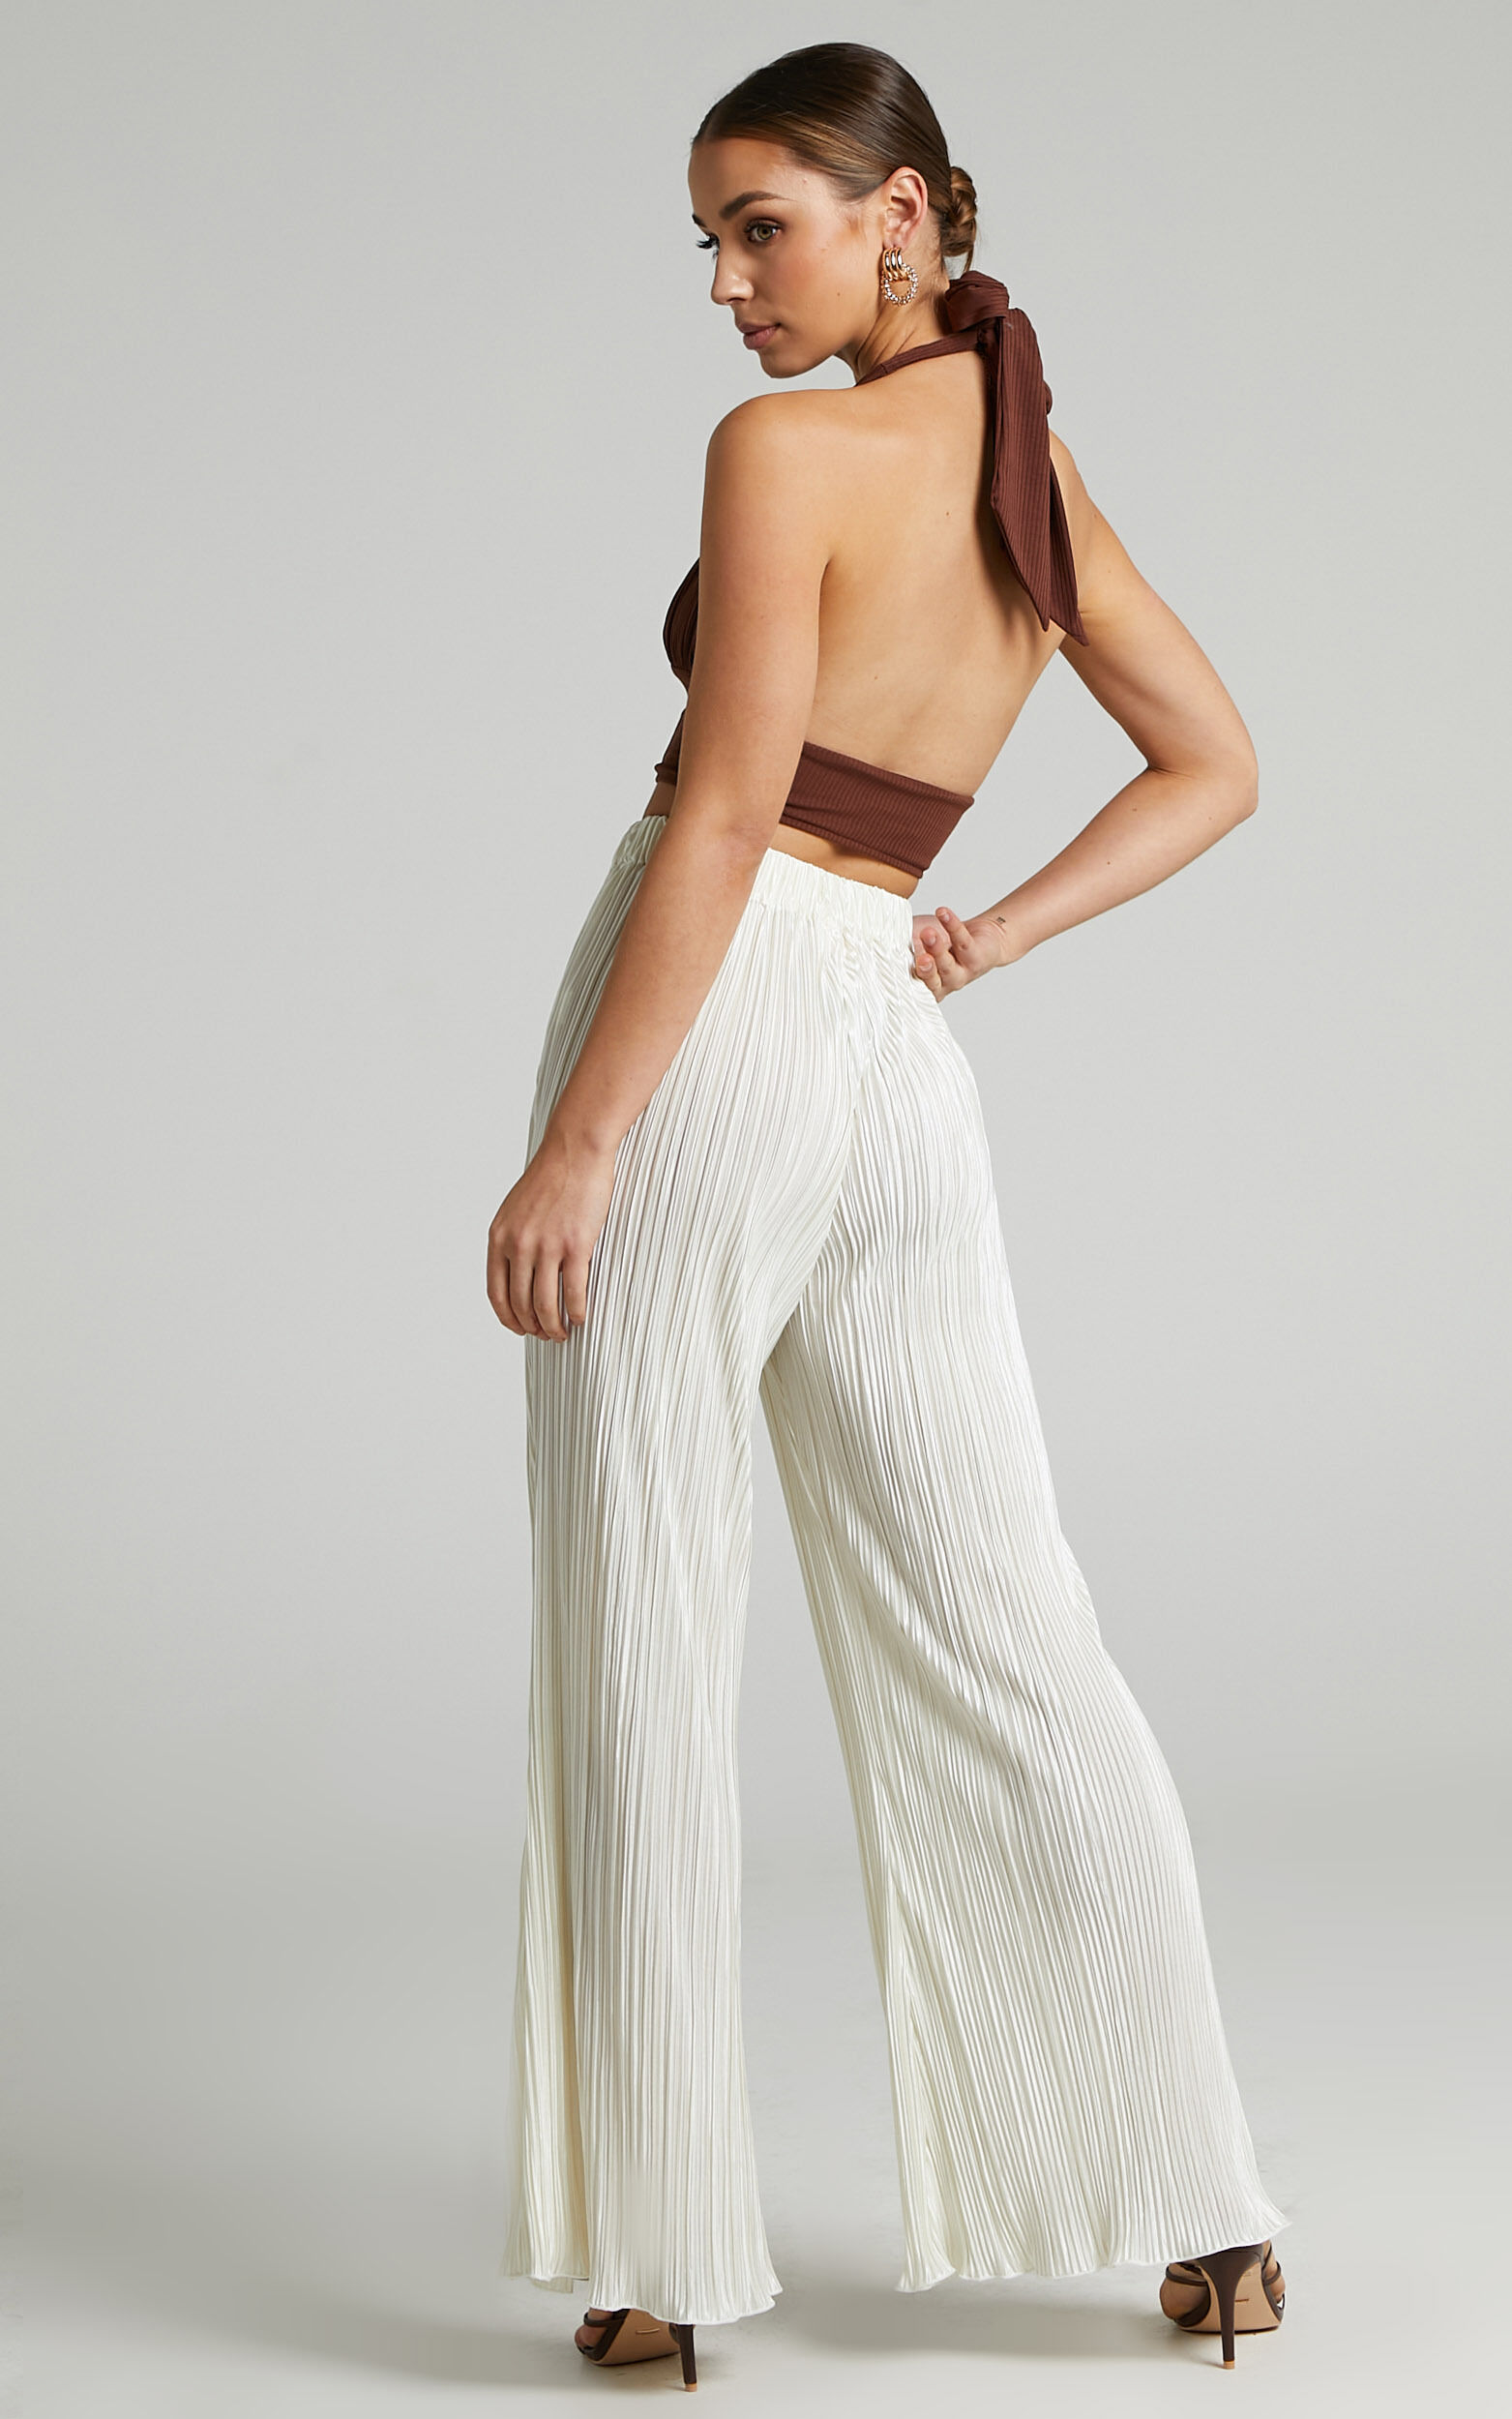 Chiara Plisse Pleated Backless Halter Neck Top in Cream